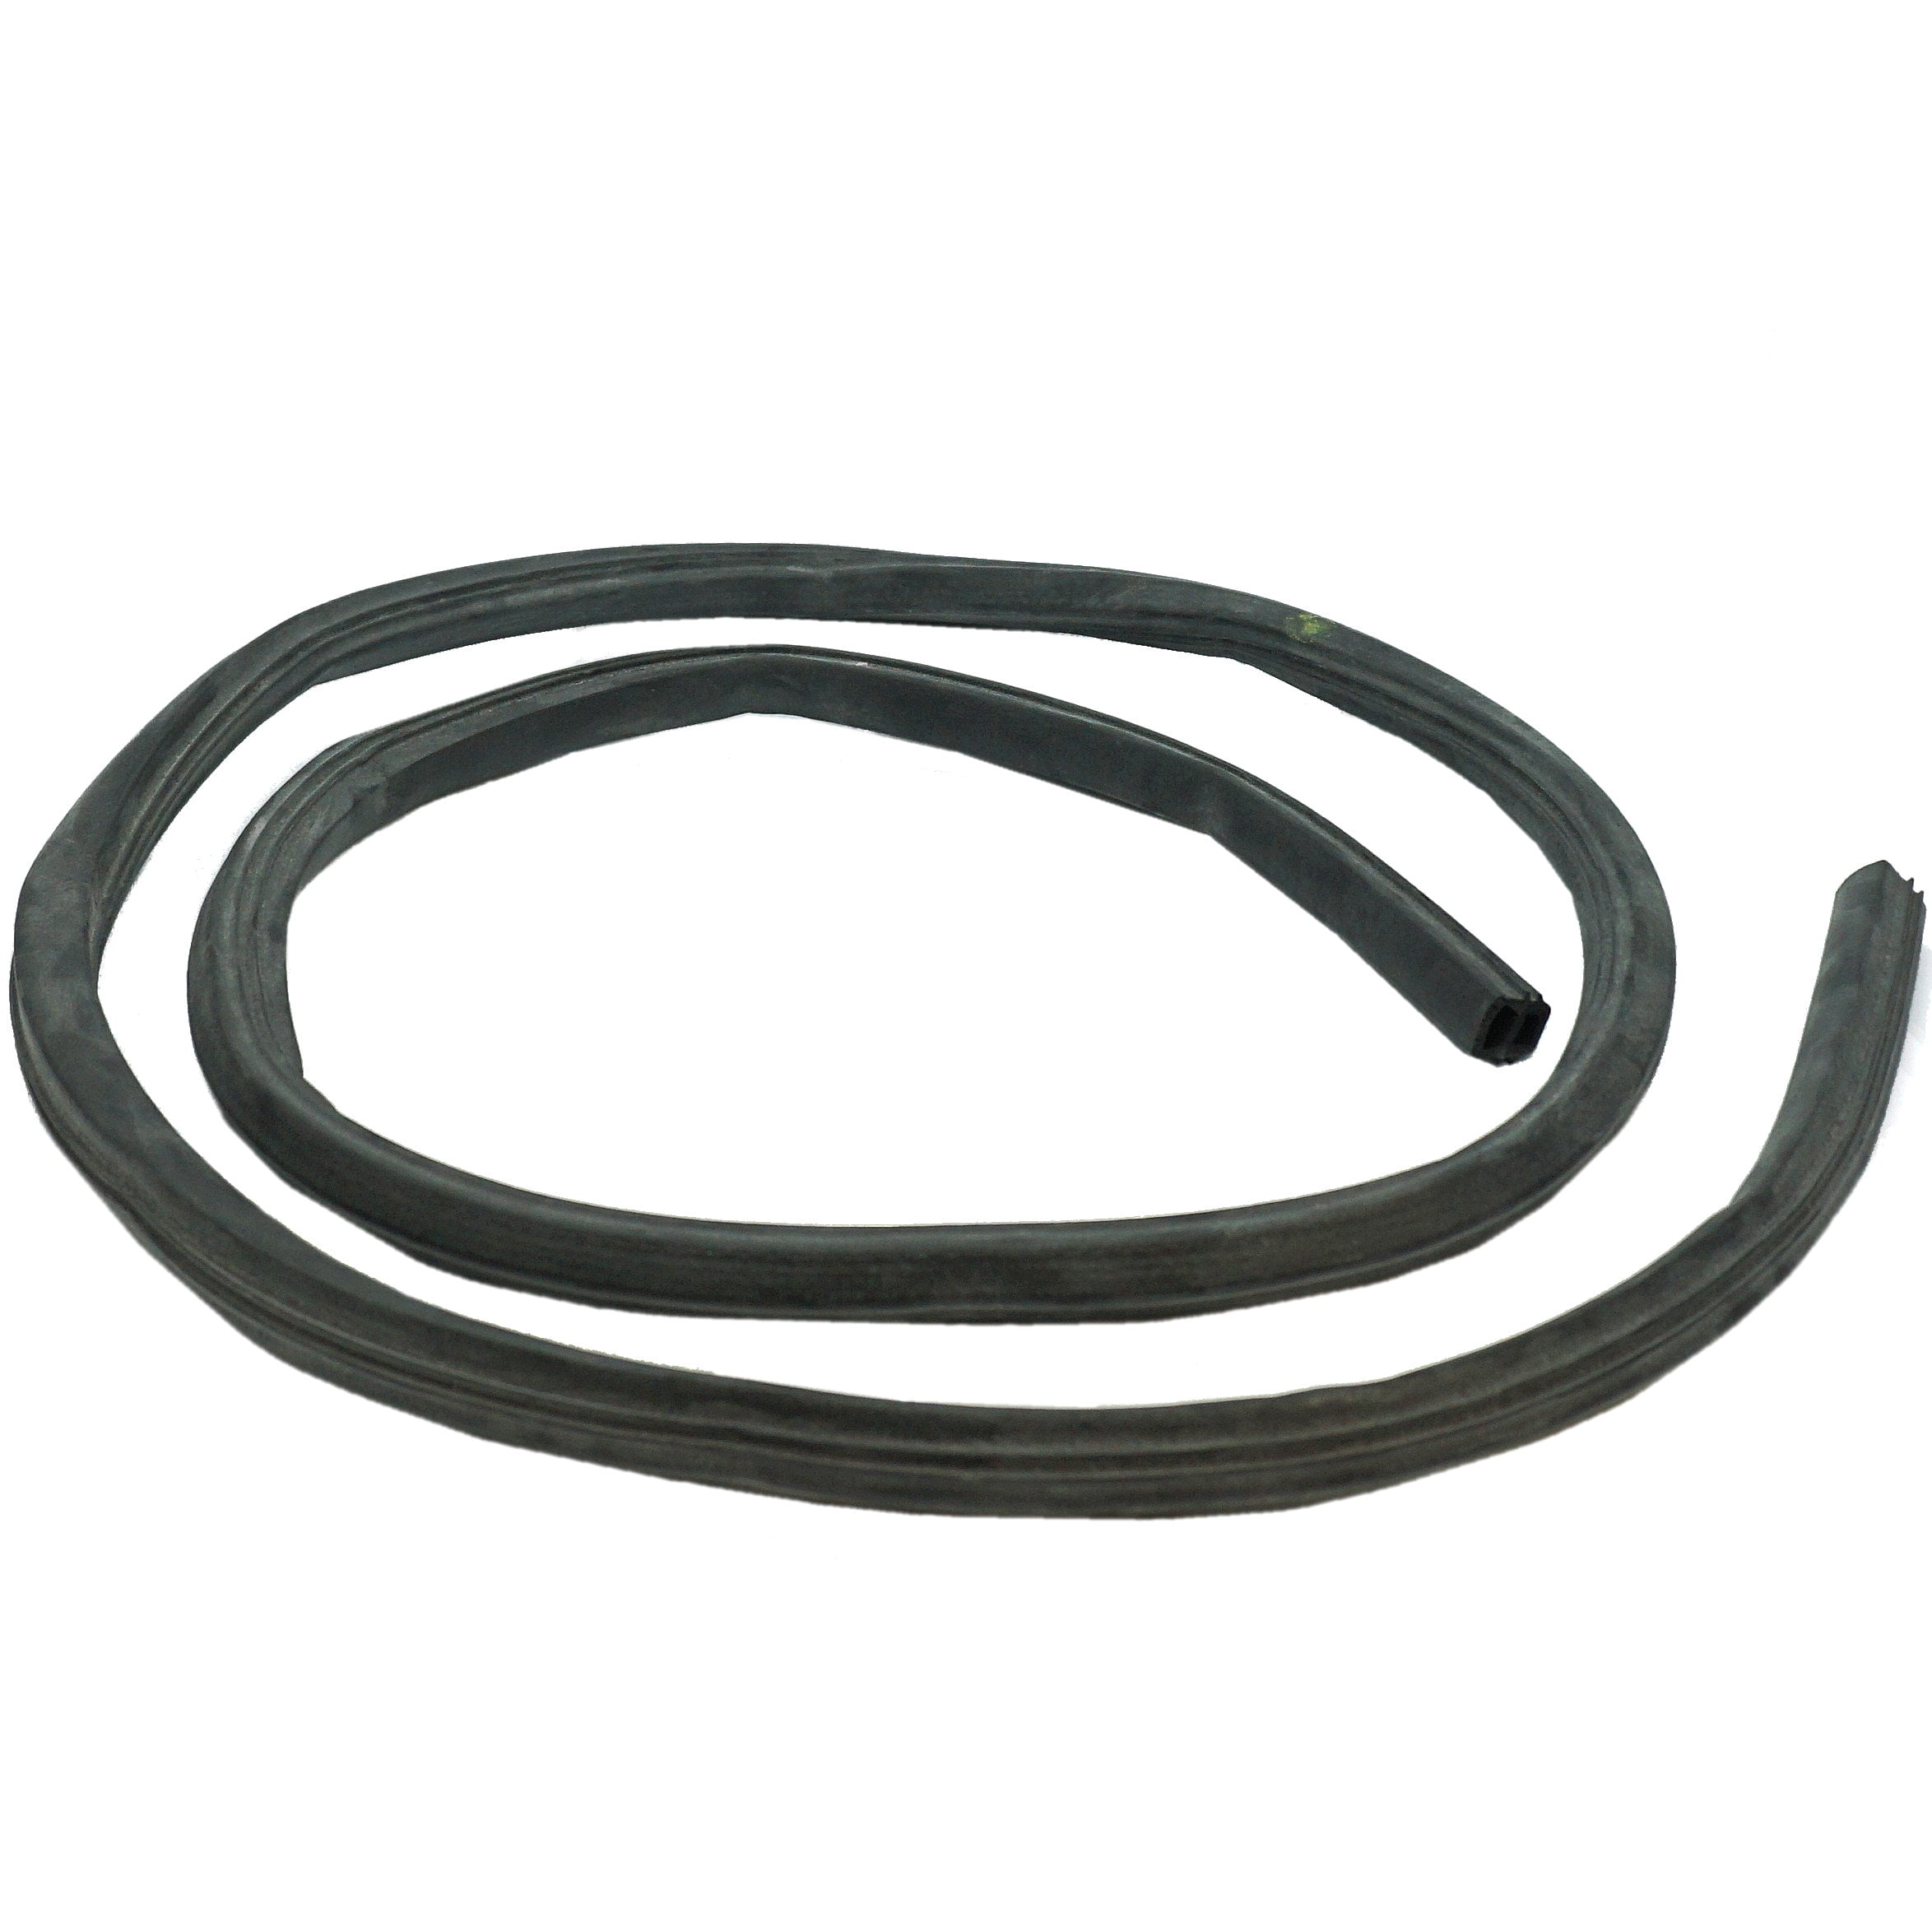 W10509257 Dishwasher Door Gasket Replacement for Part Number PS11755809 